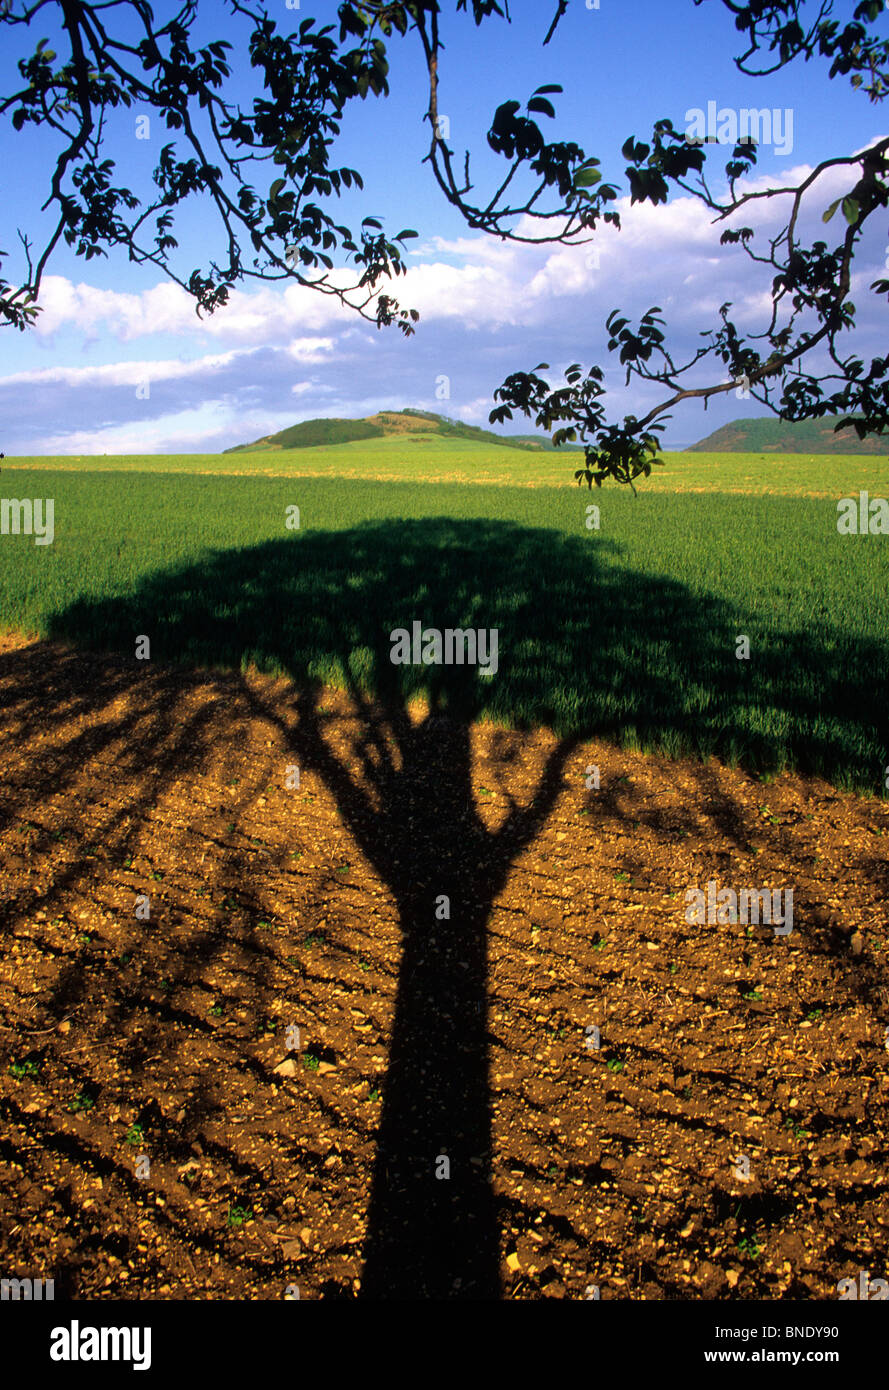 Shadow of a tree in the middle of a ploughed field. Stock Photo